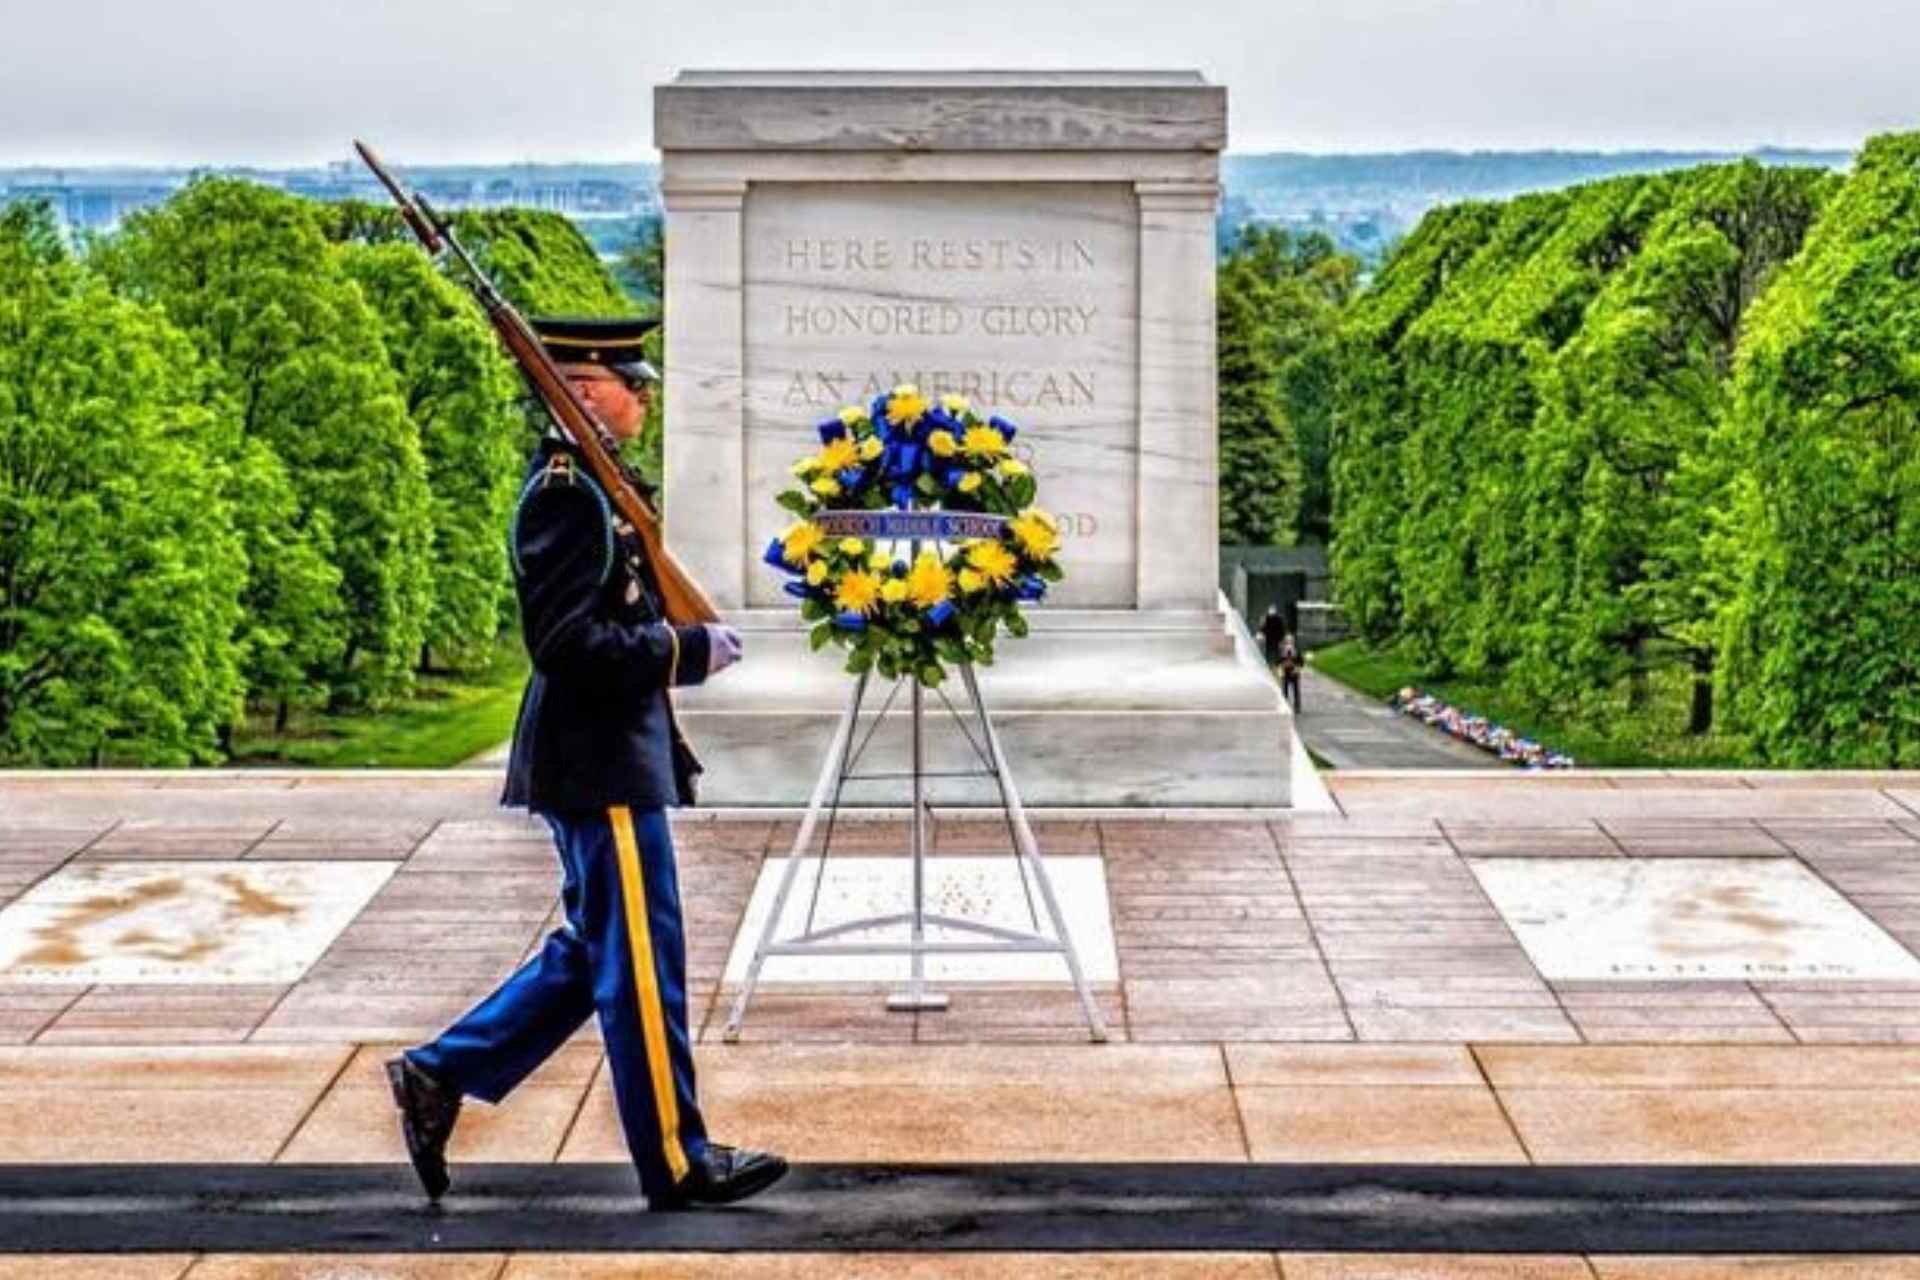 Tomb of the Unknown Soldier at Arlington National Cemetery May 6, 2018. (U.S. Army photo by Reese Brown)